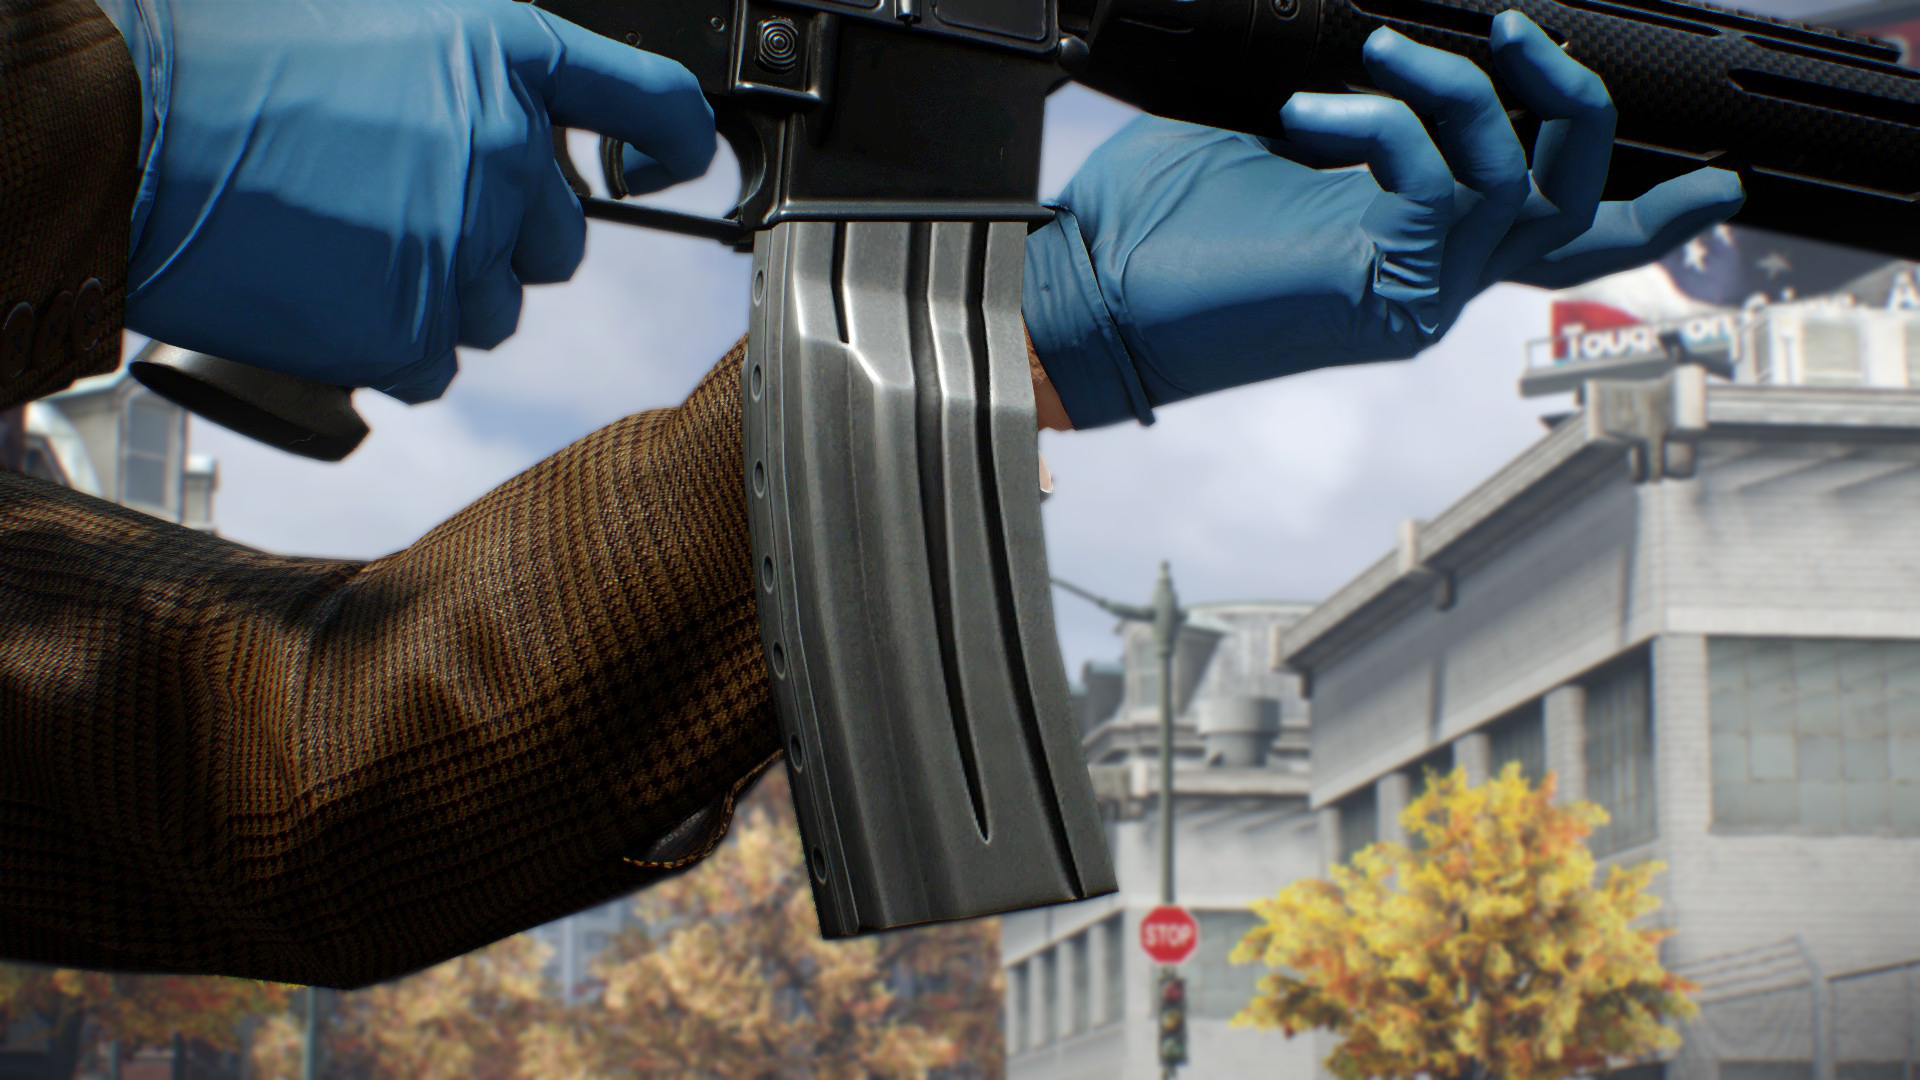 PAYDAY 2 Images 